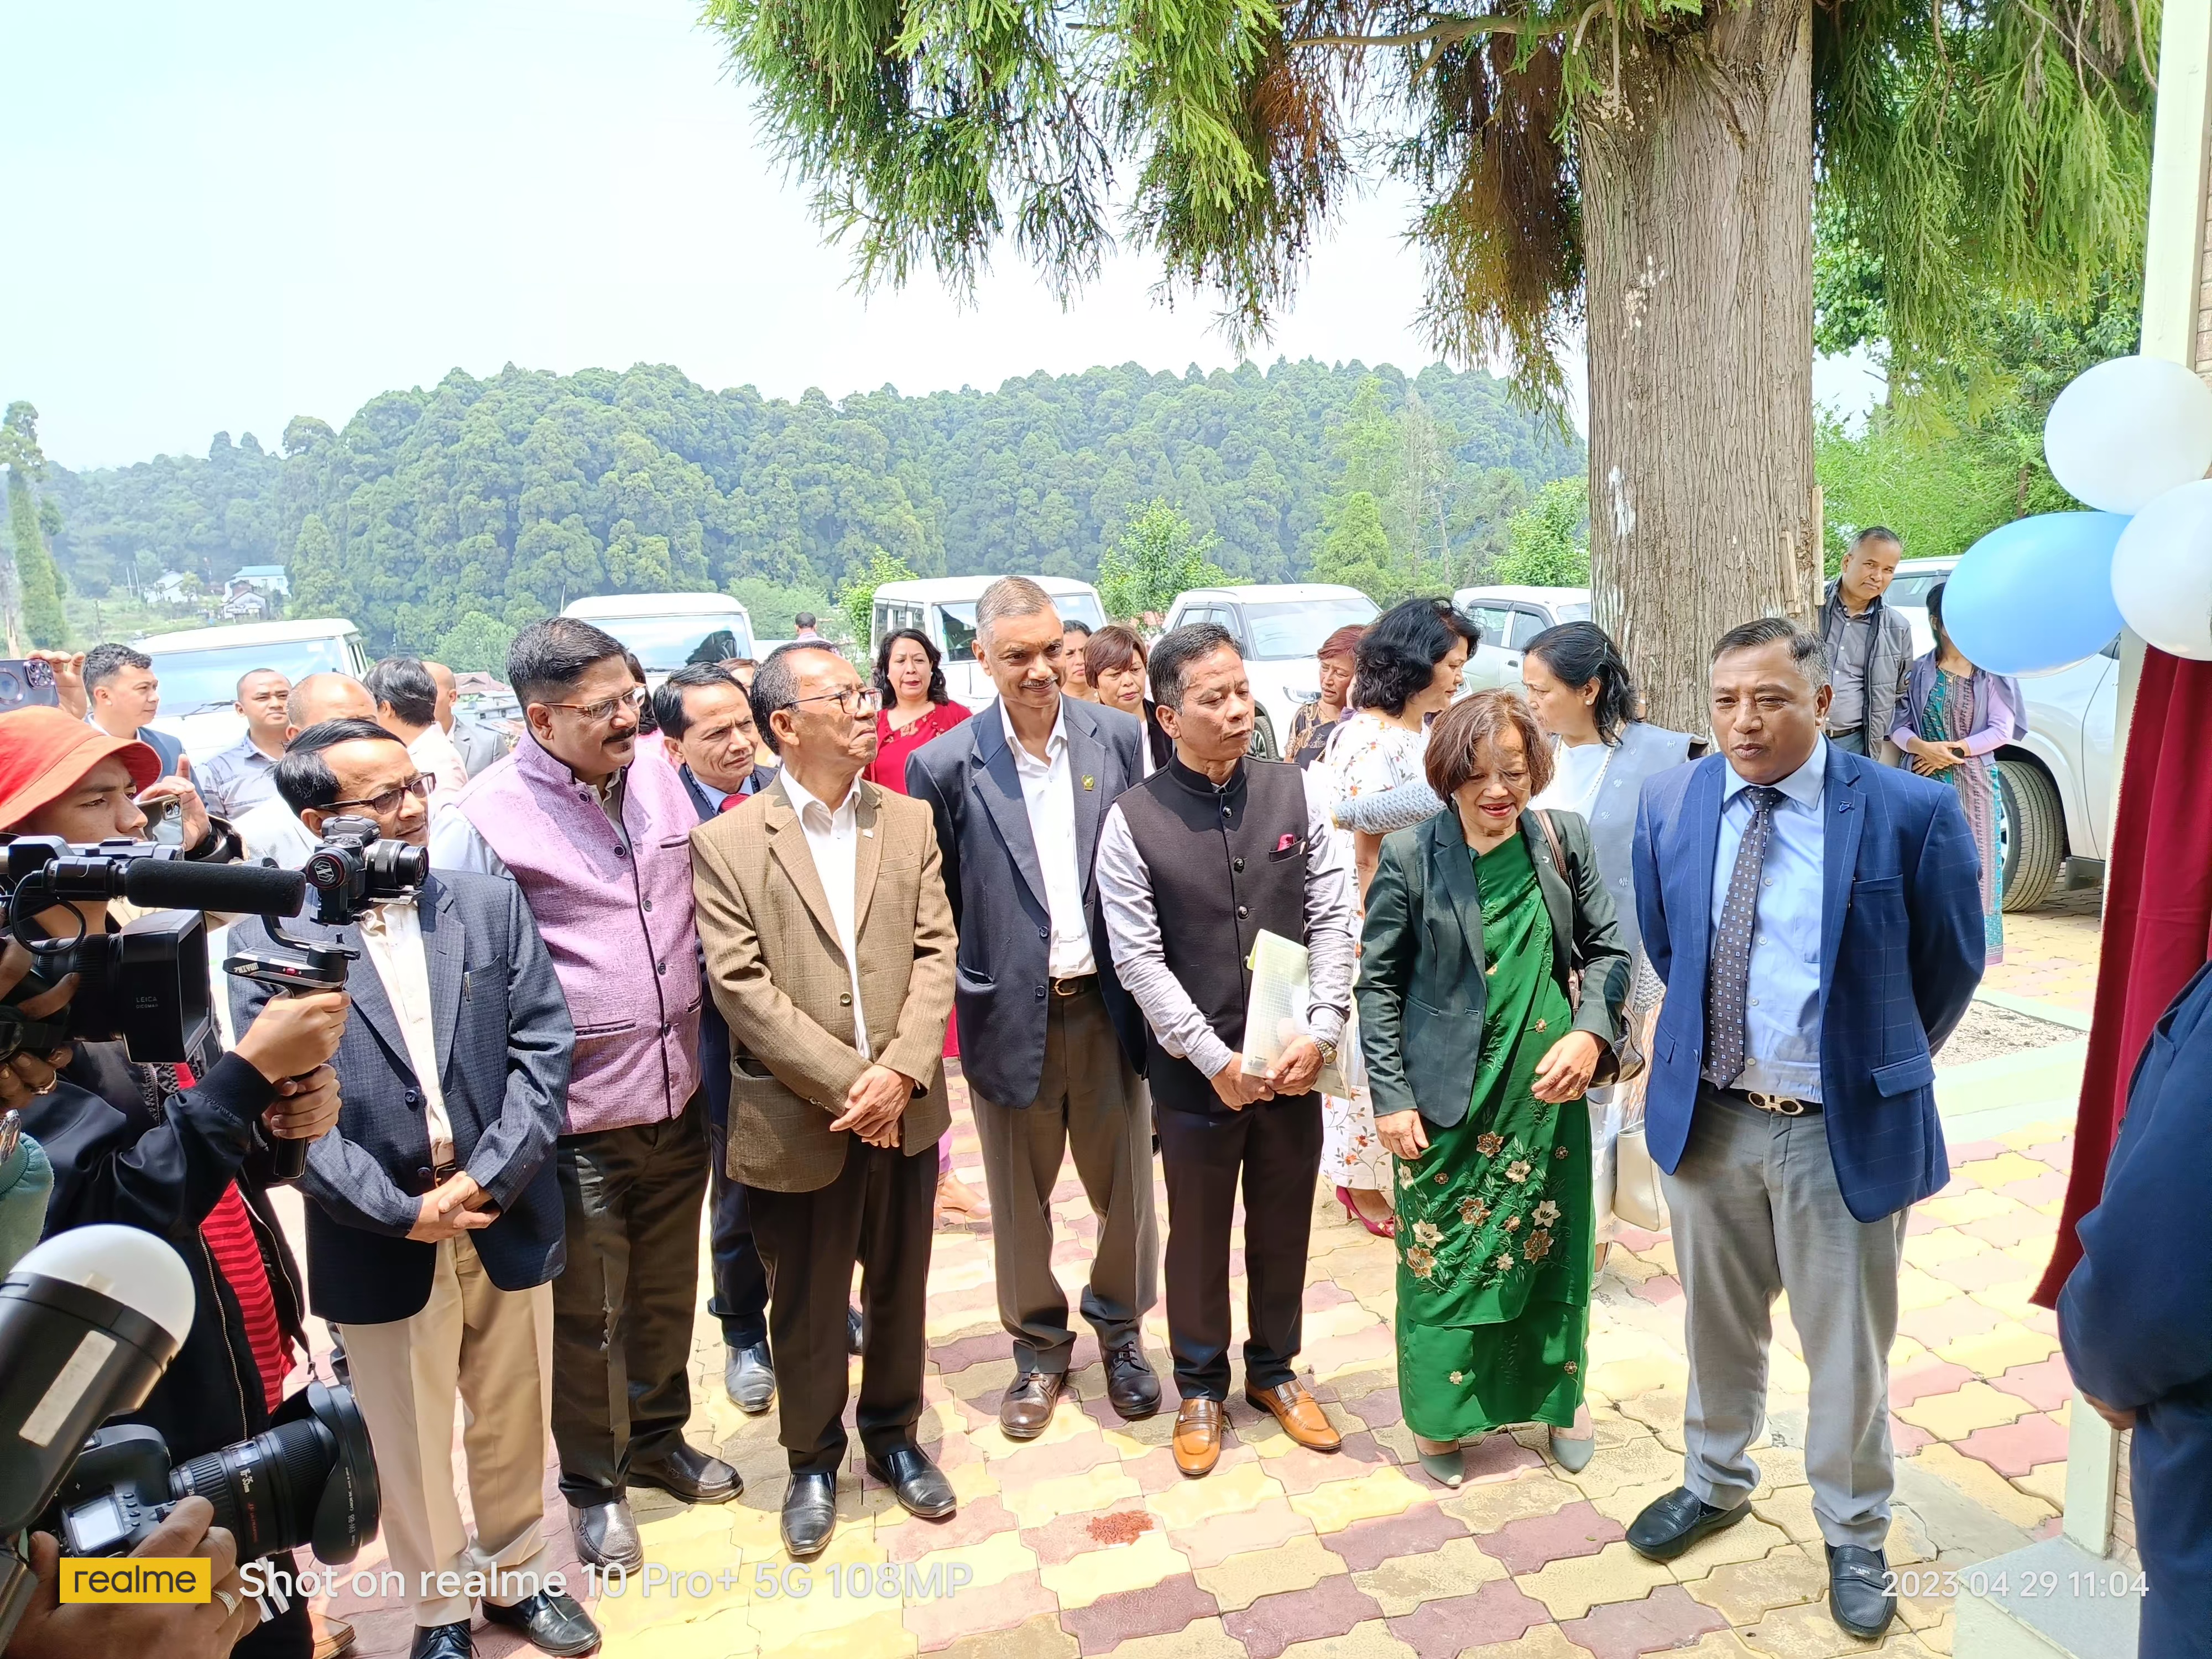 Inauguration of Indo Dan Multipurpose Hall and Guest House, Upper Shillong on 29th April 2023